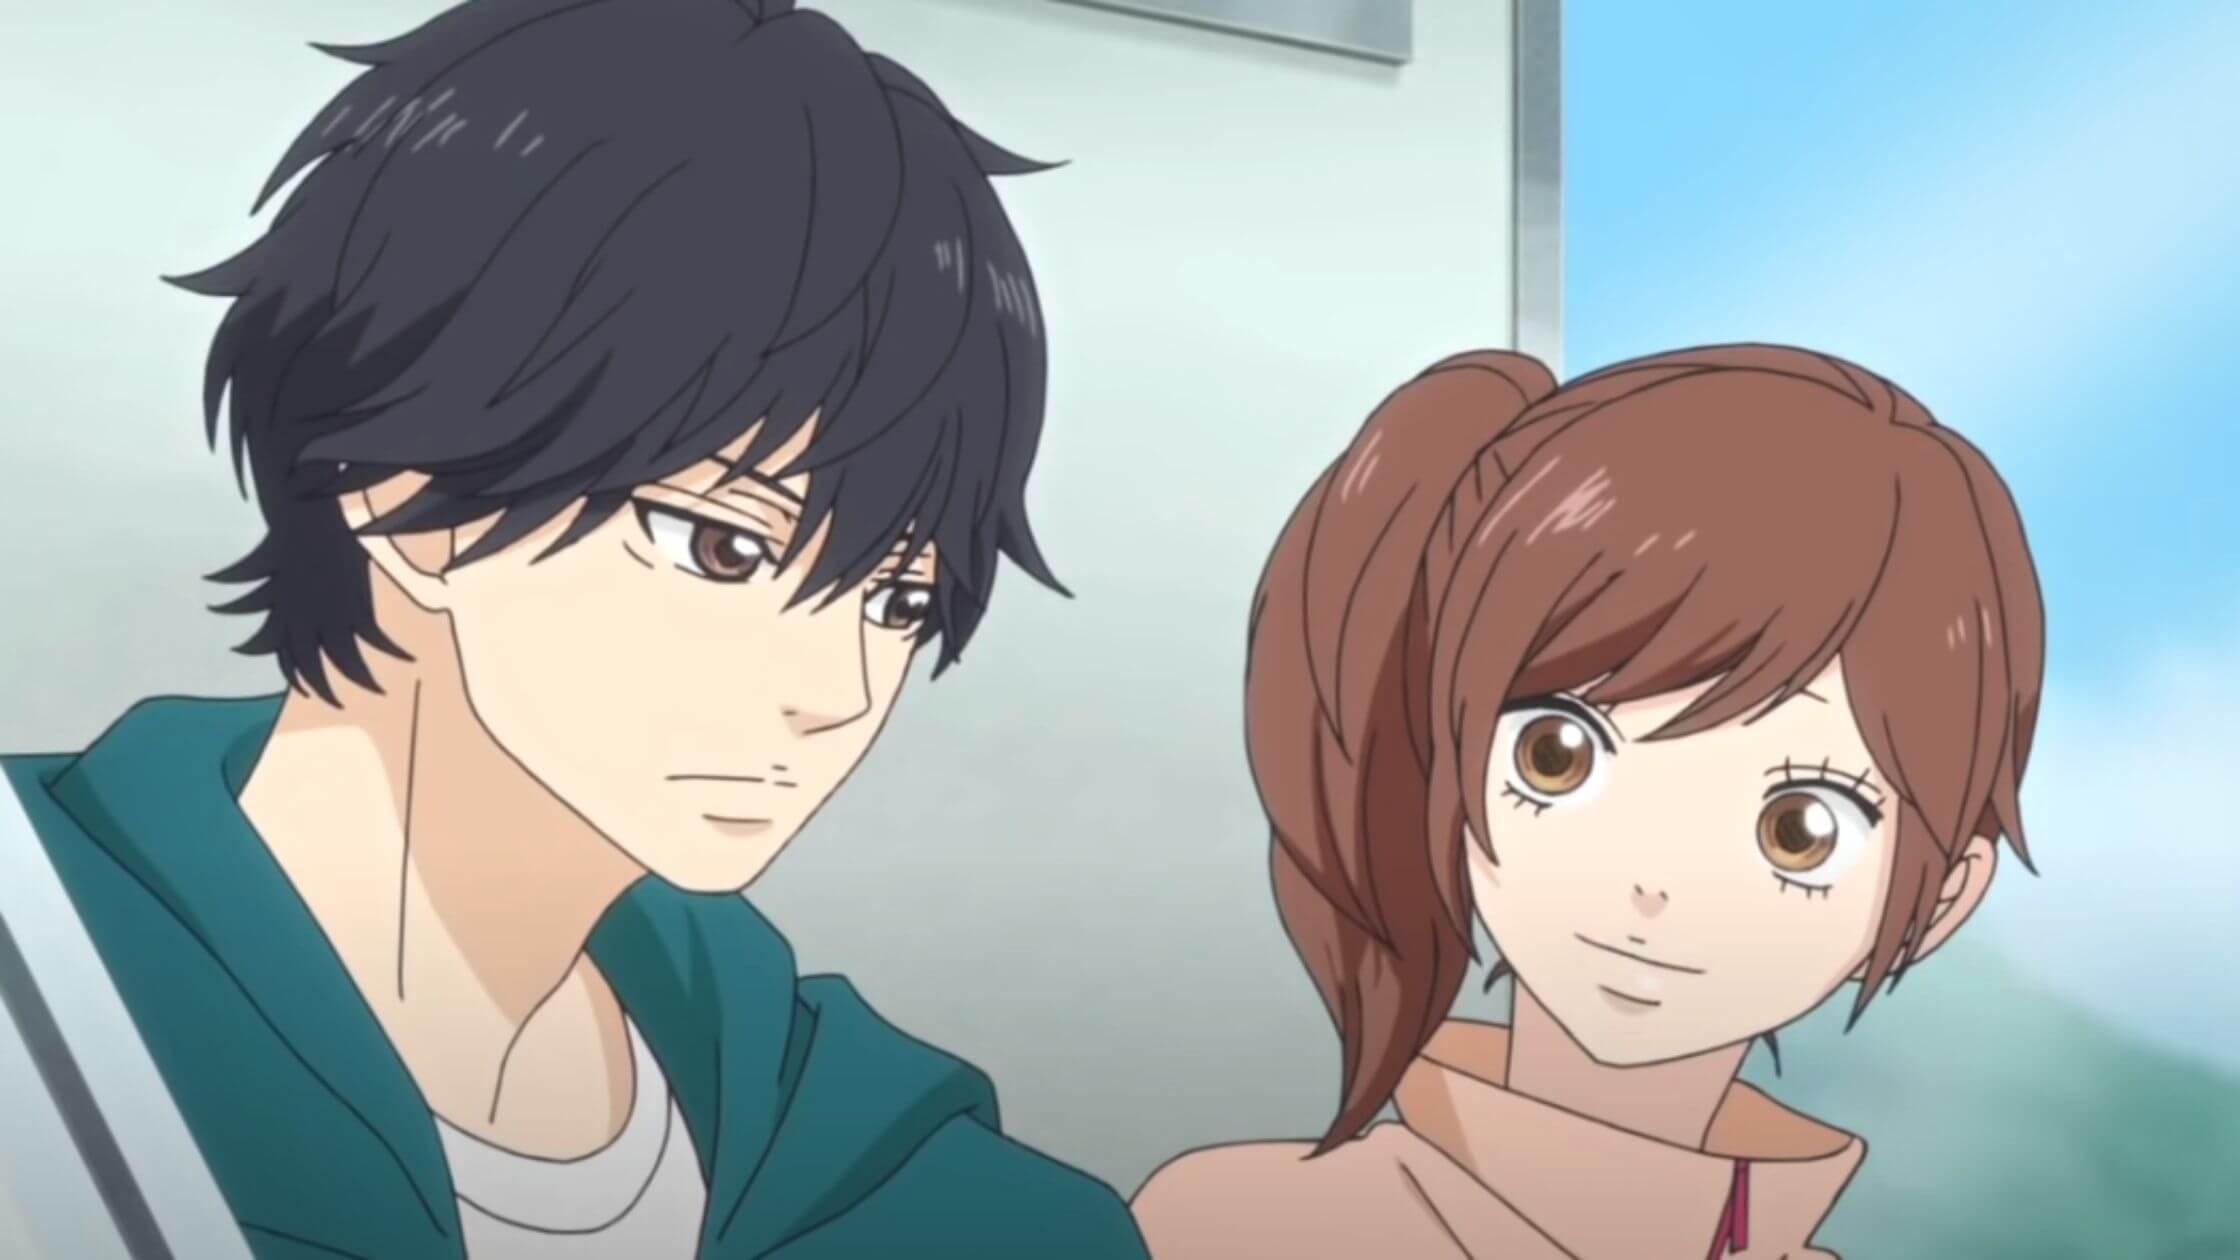 Is-Ao-Haru-Ride-Season-2-Coming-Soon-Revealing-Facts-About-Release-Date-Plot-Cast-Updates-Trailer-And-More-1